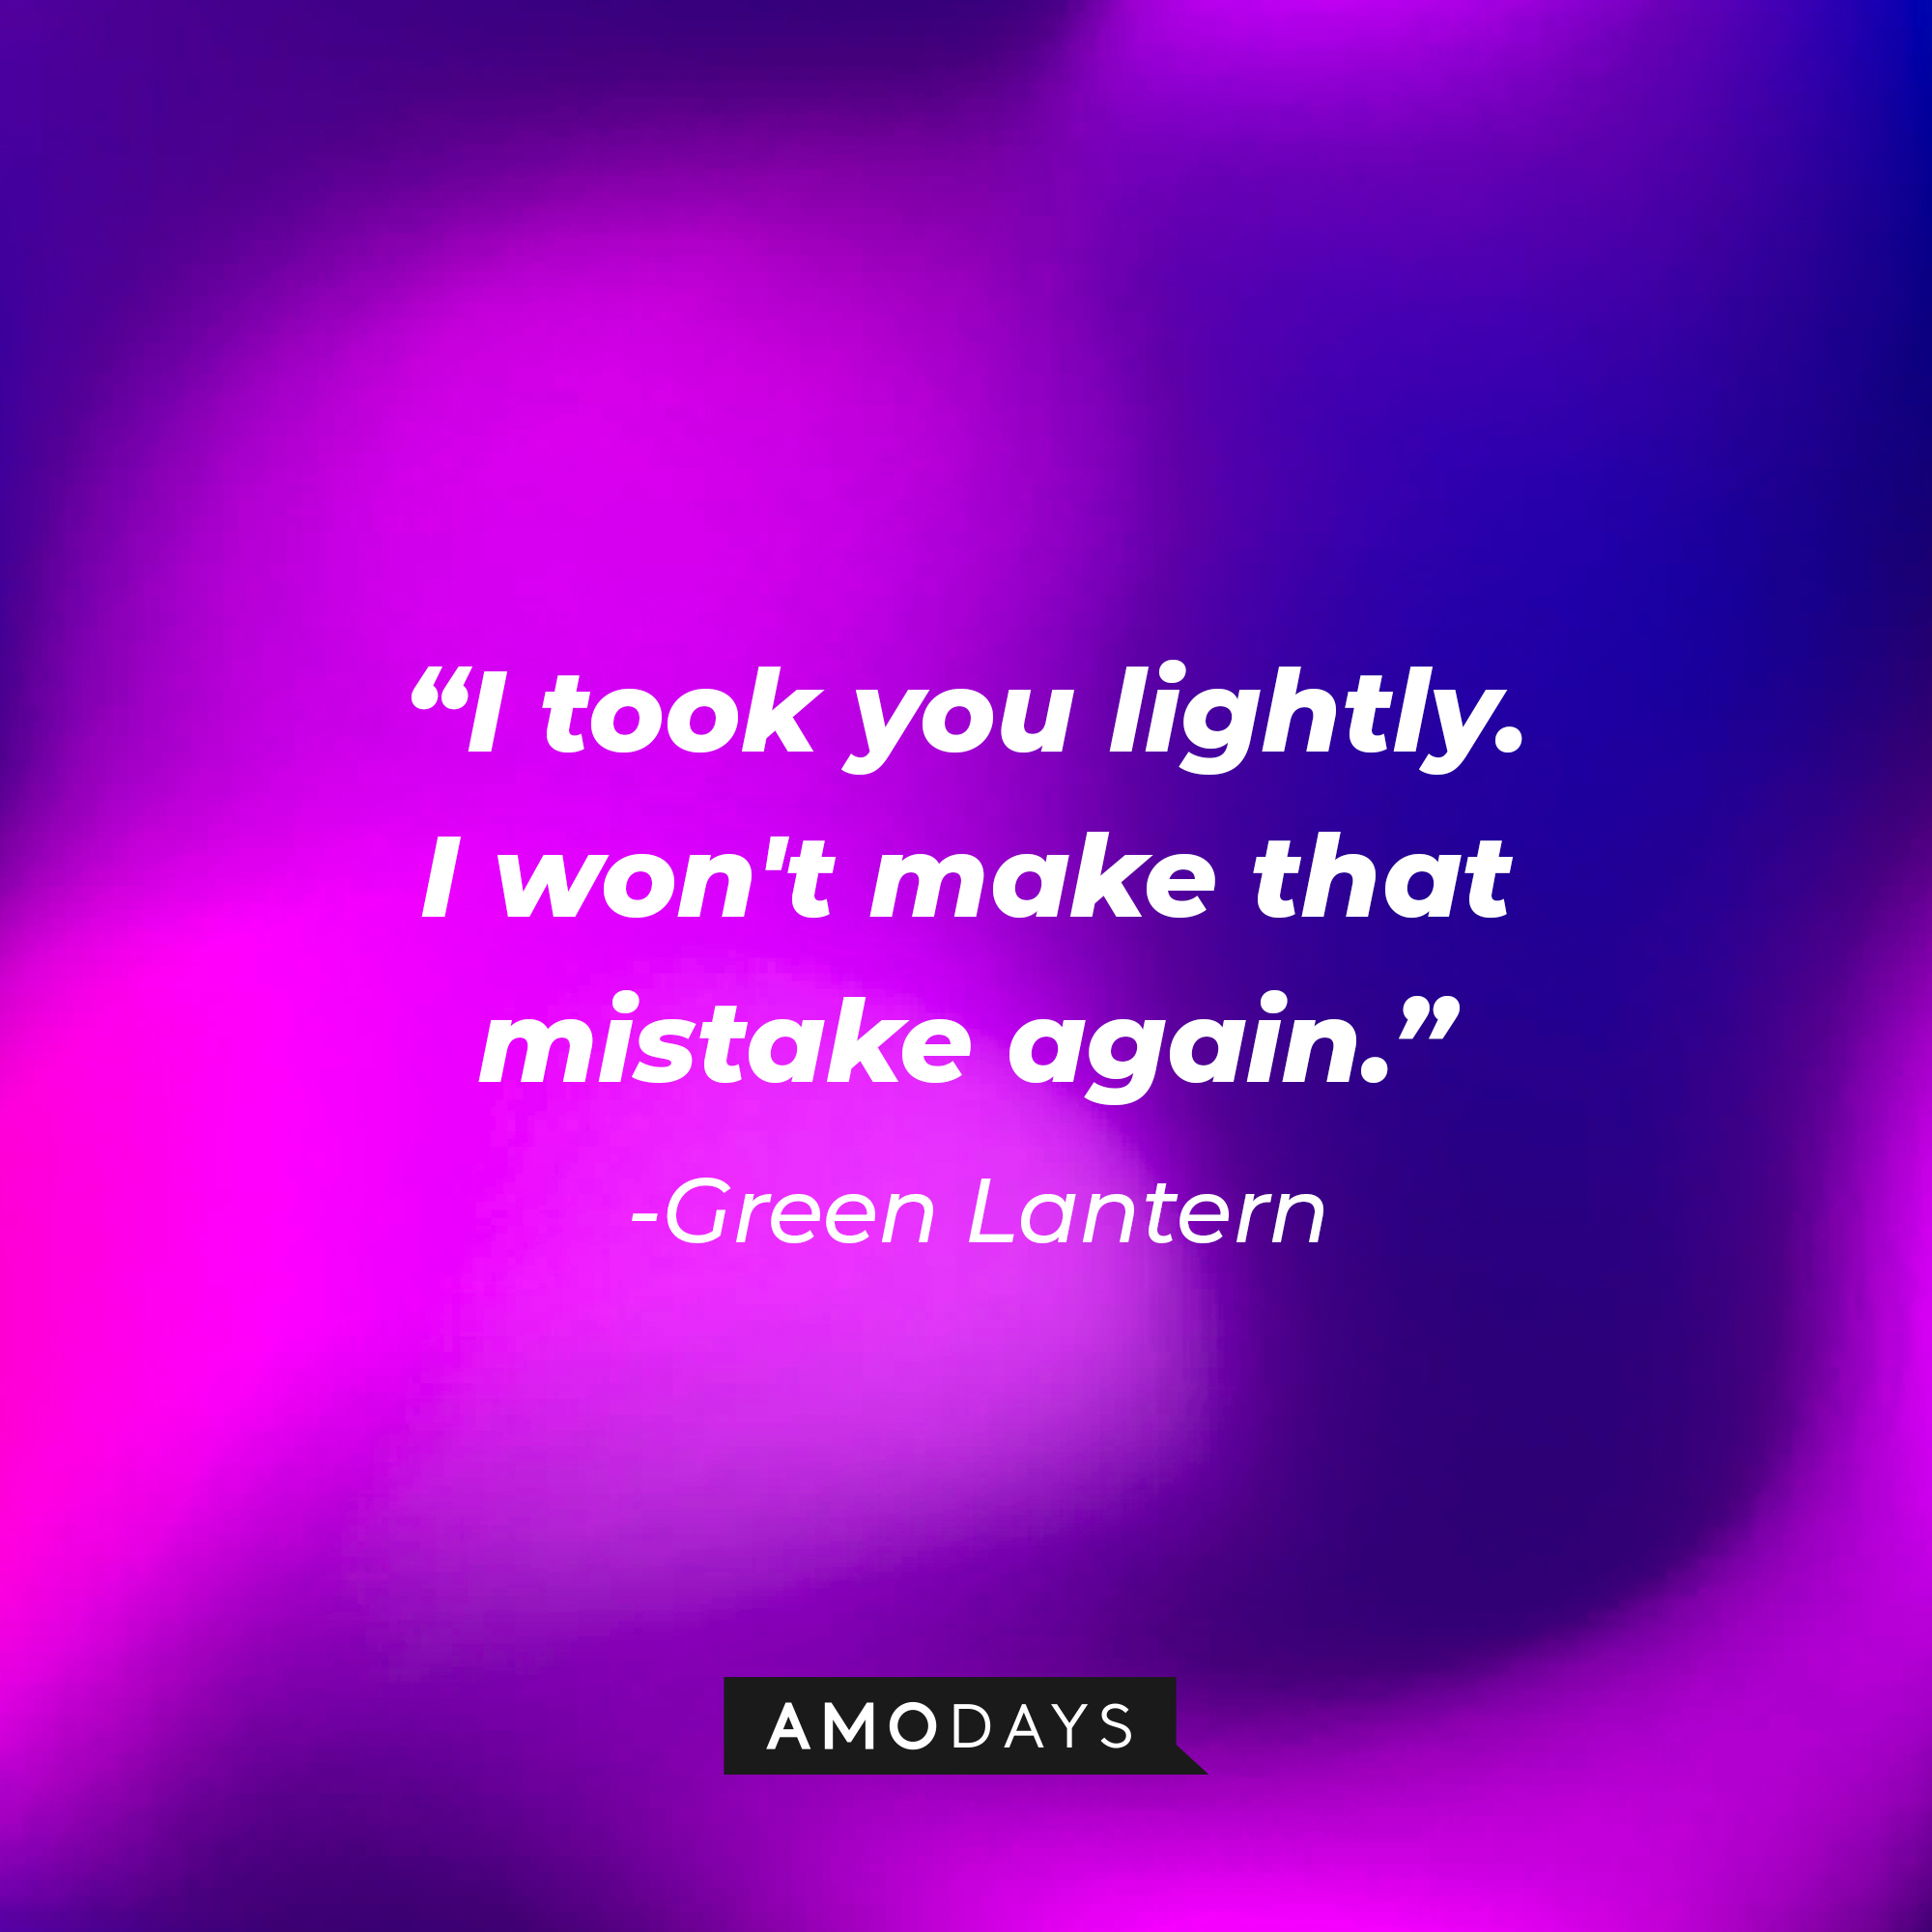 Green Lantern's quote: "I took you lightly. I won't make that mistake again." | Source: AmoDays